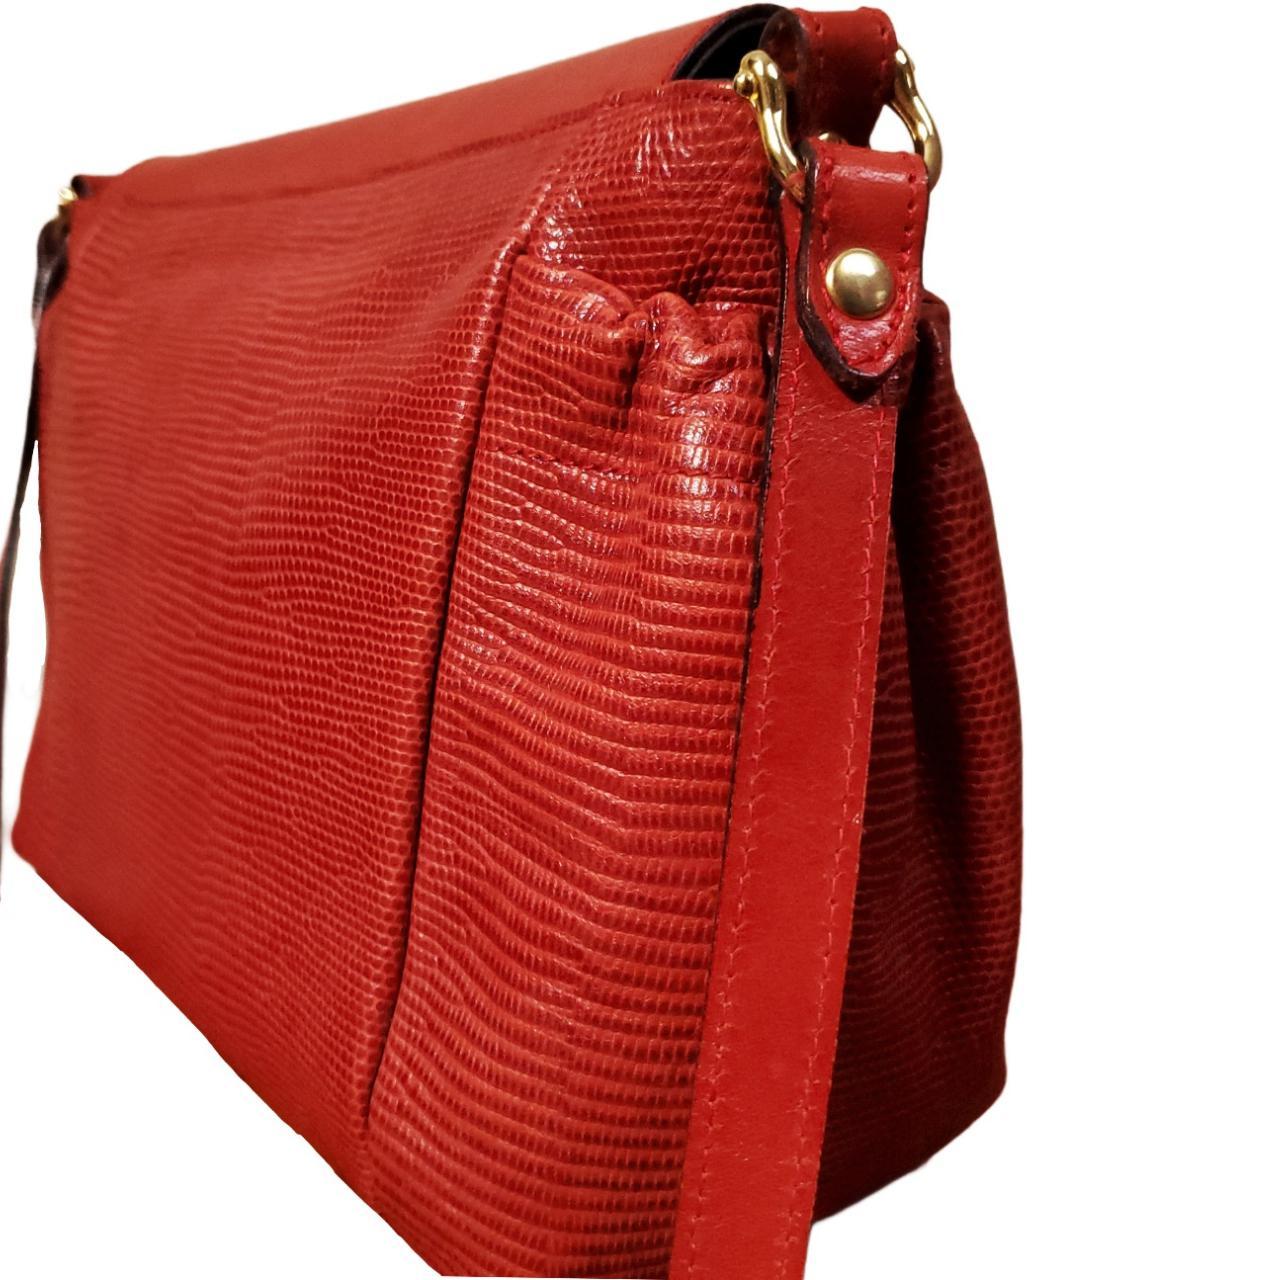 Product Image 2 - Vintage Red Leather Crossbody Bag

Romano